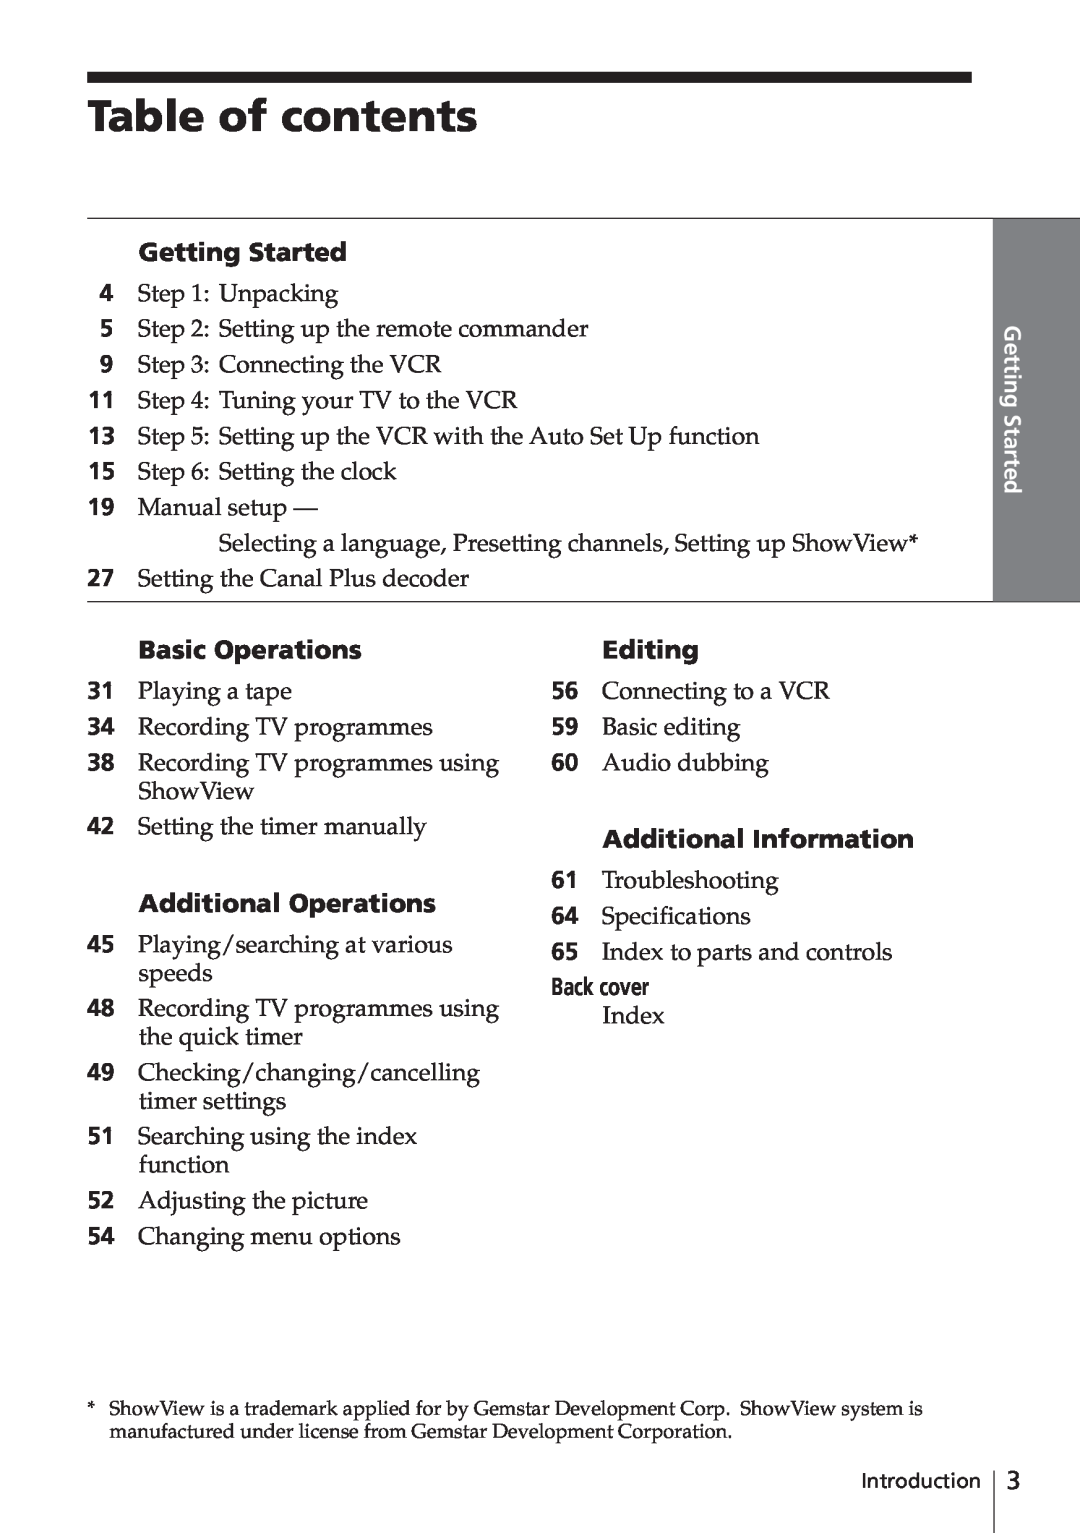 Sony SLV-E580EG manual Table of contents, Getting Started, Basic Operations, Additional Operations, Editing, Back cover 